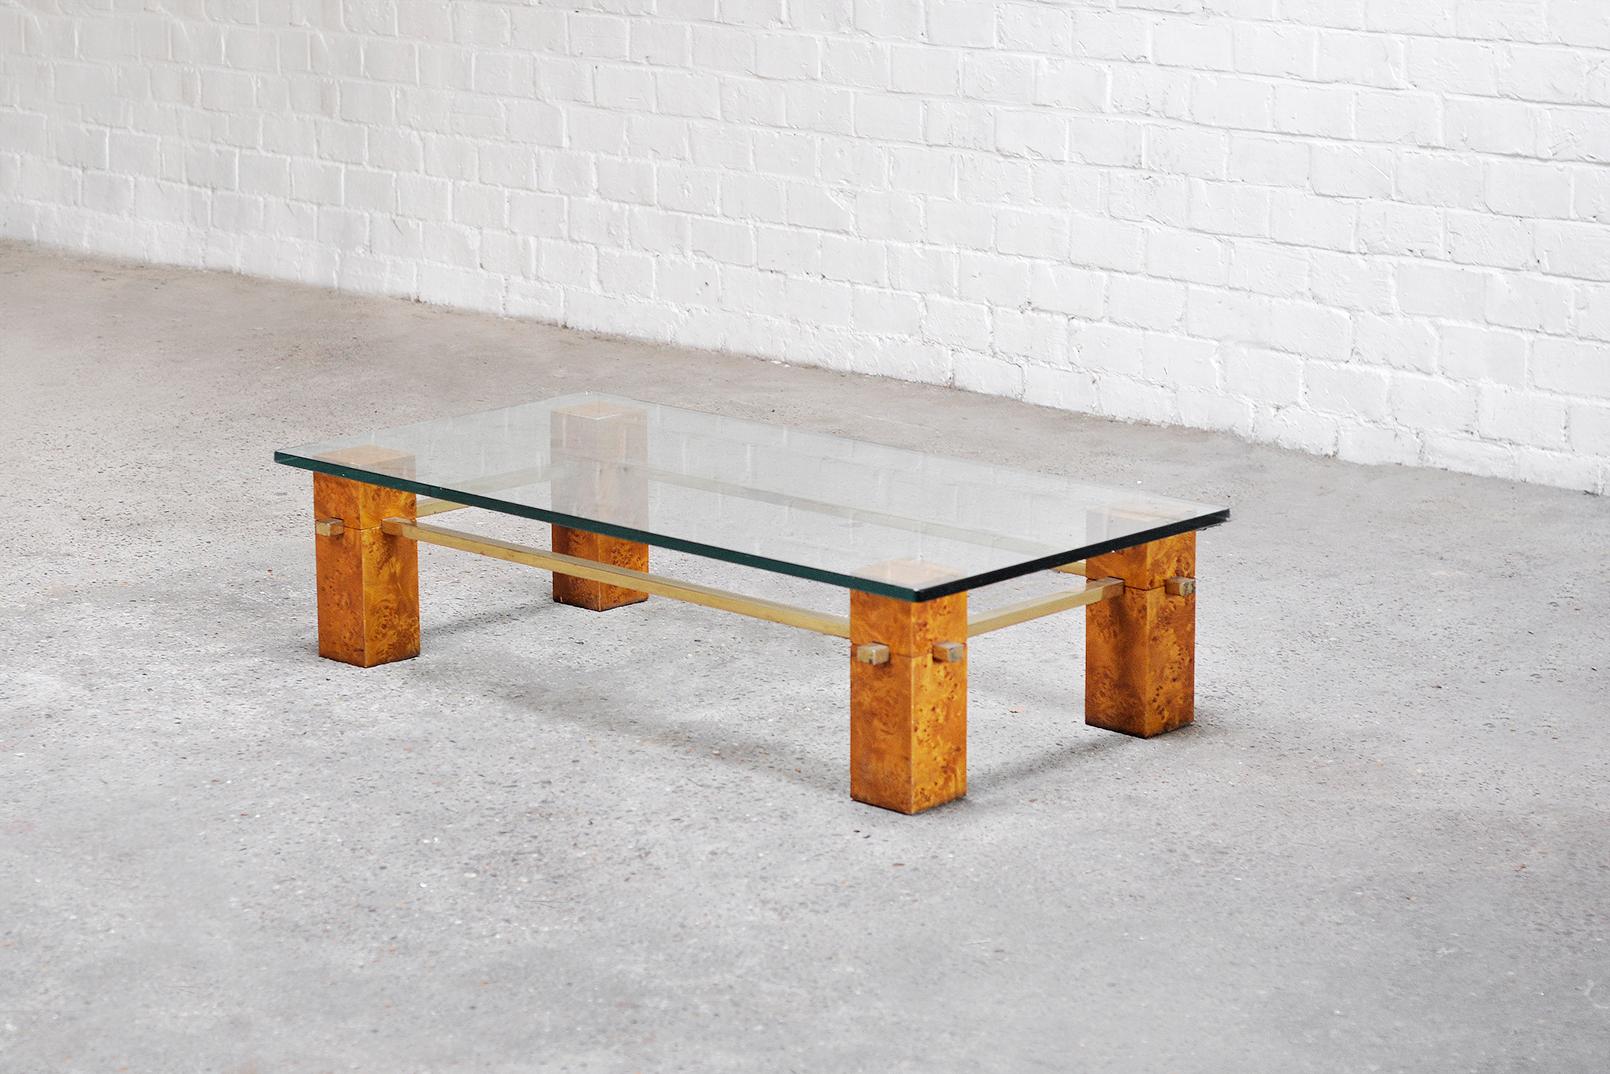 Beautiful Italian 1970s burl wood coffee table. Constructed out of burl wood legs connected by a brass structure. Thick glass top. This piece is attributed to Willy Rizzo.

Wear consistent with age and use, in good vintage condition. Patinated